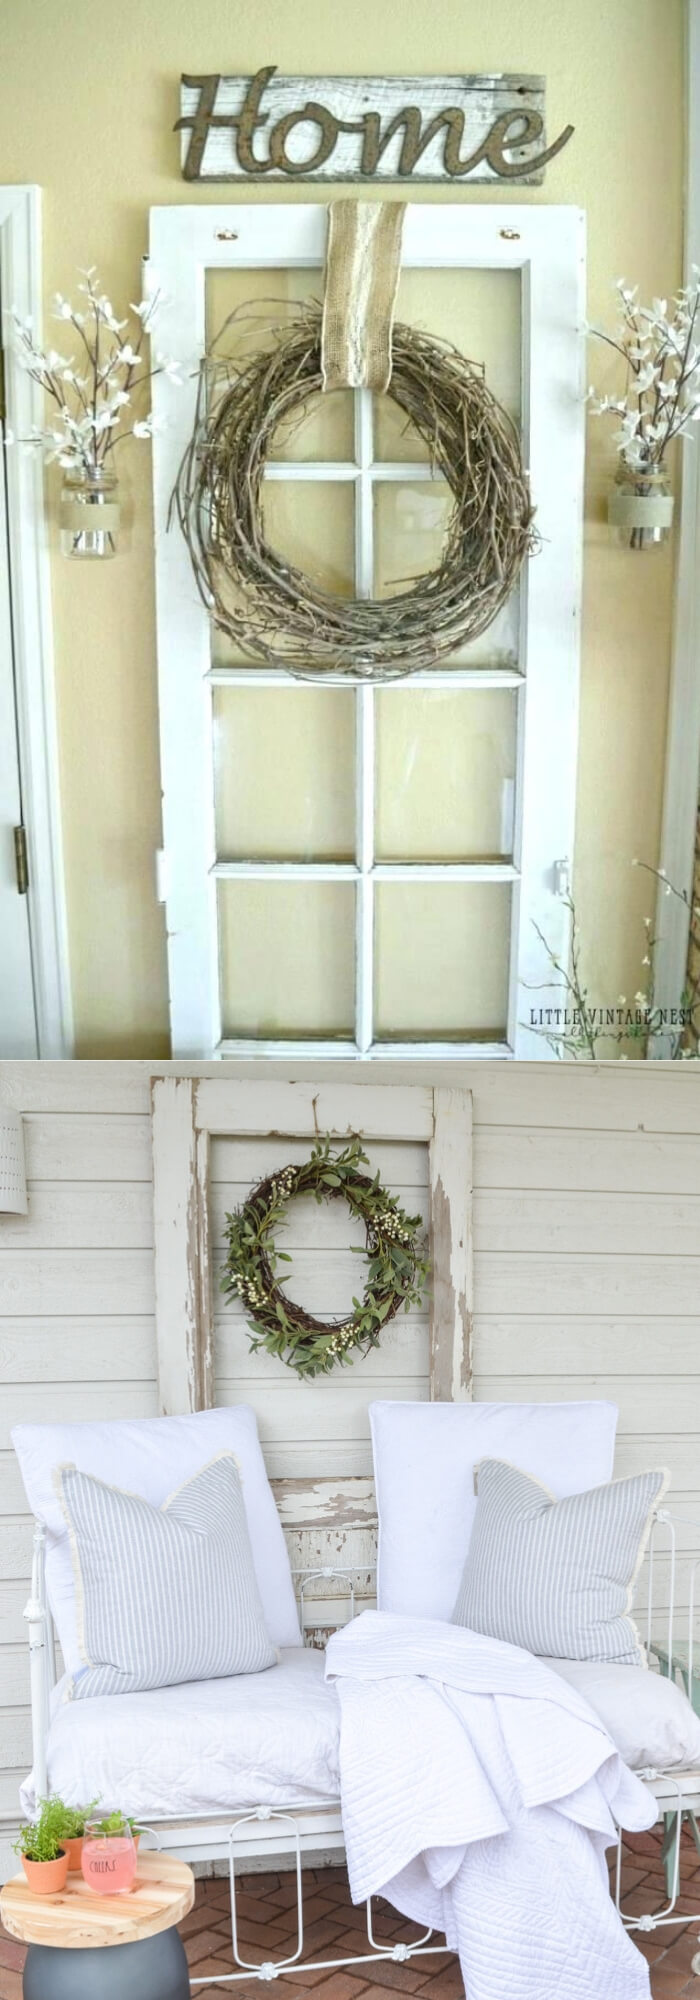 An old door decor with a twisted dry branch wreath | Stunning Farmhouse Dining Room Design & Decor Ideas